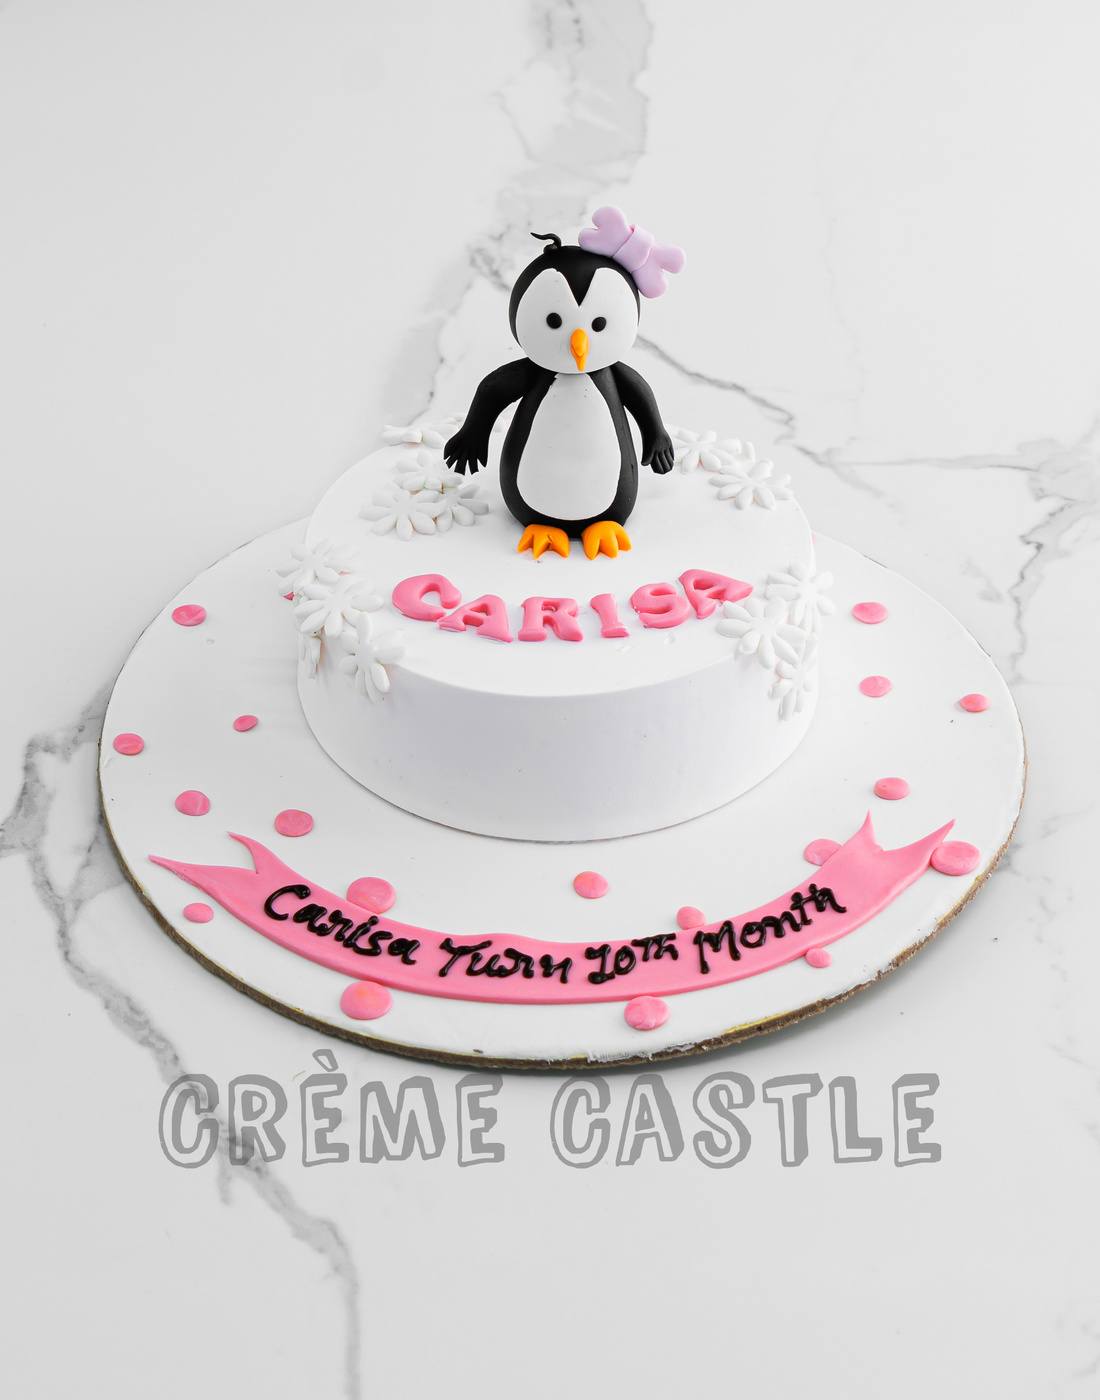 Penguin Cake | More details and photos can be found here fow… | Flickr